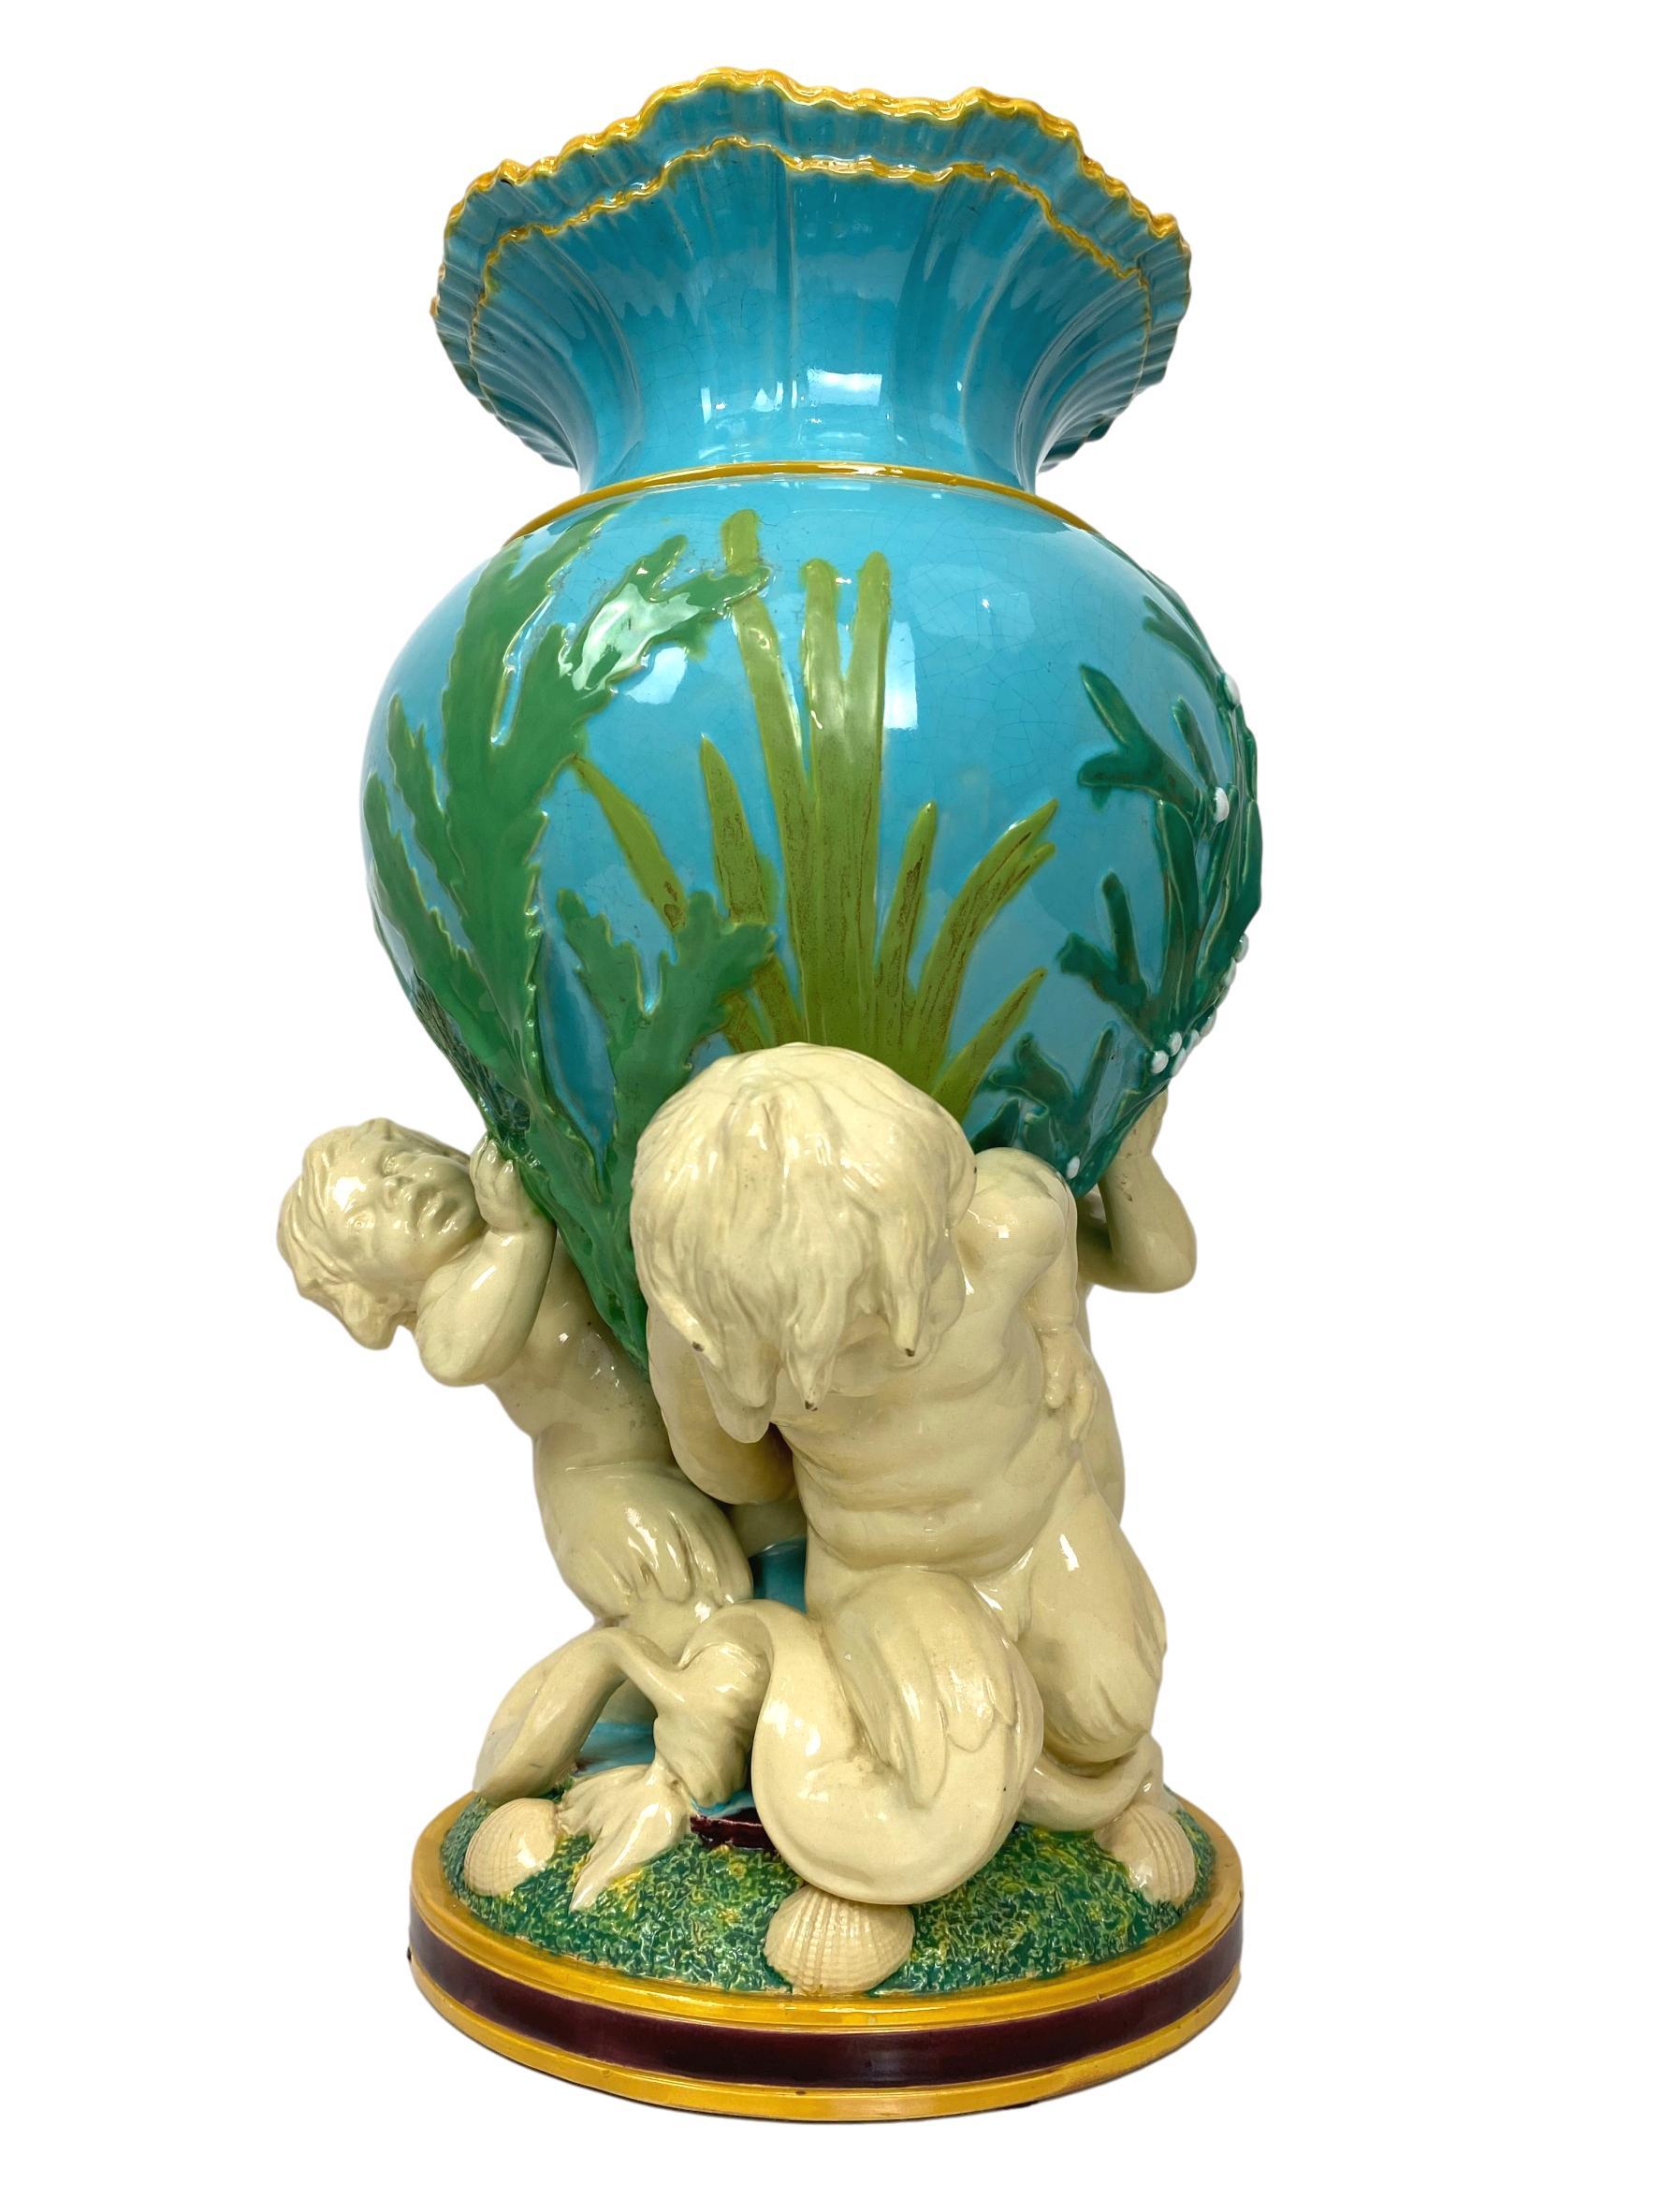 Victorian Minton Majolica Triton Marine Vase in Green, Turquoise, and Pink, ca. 1855